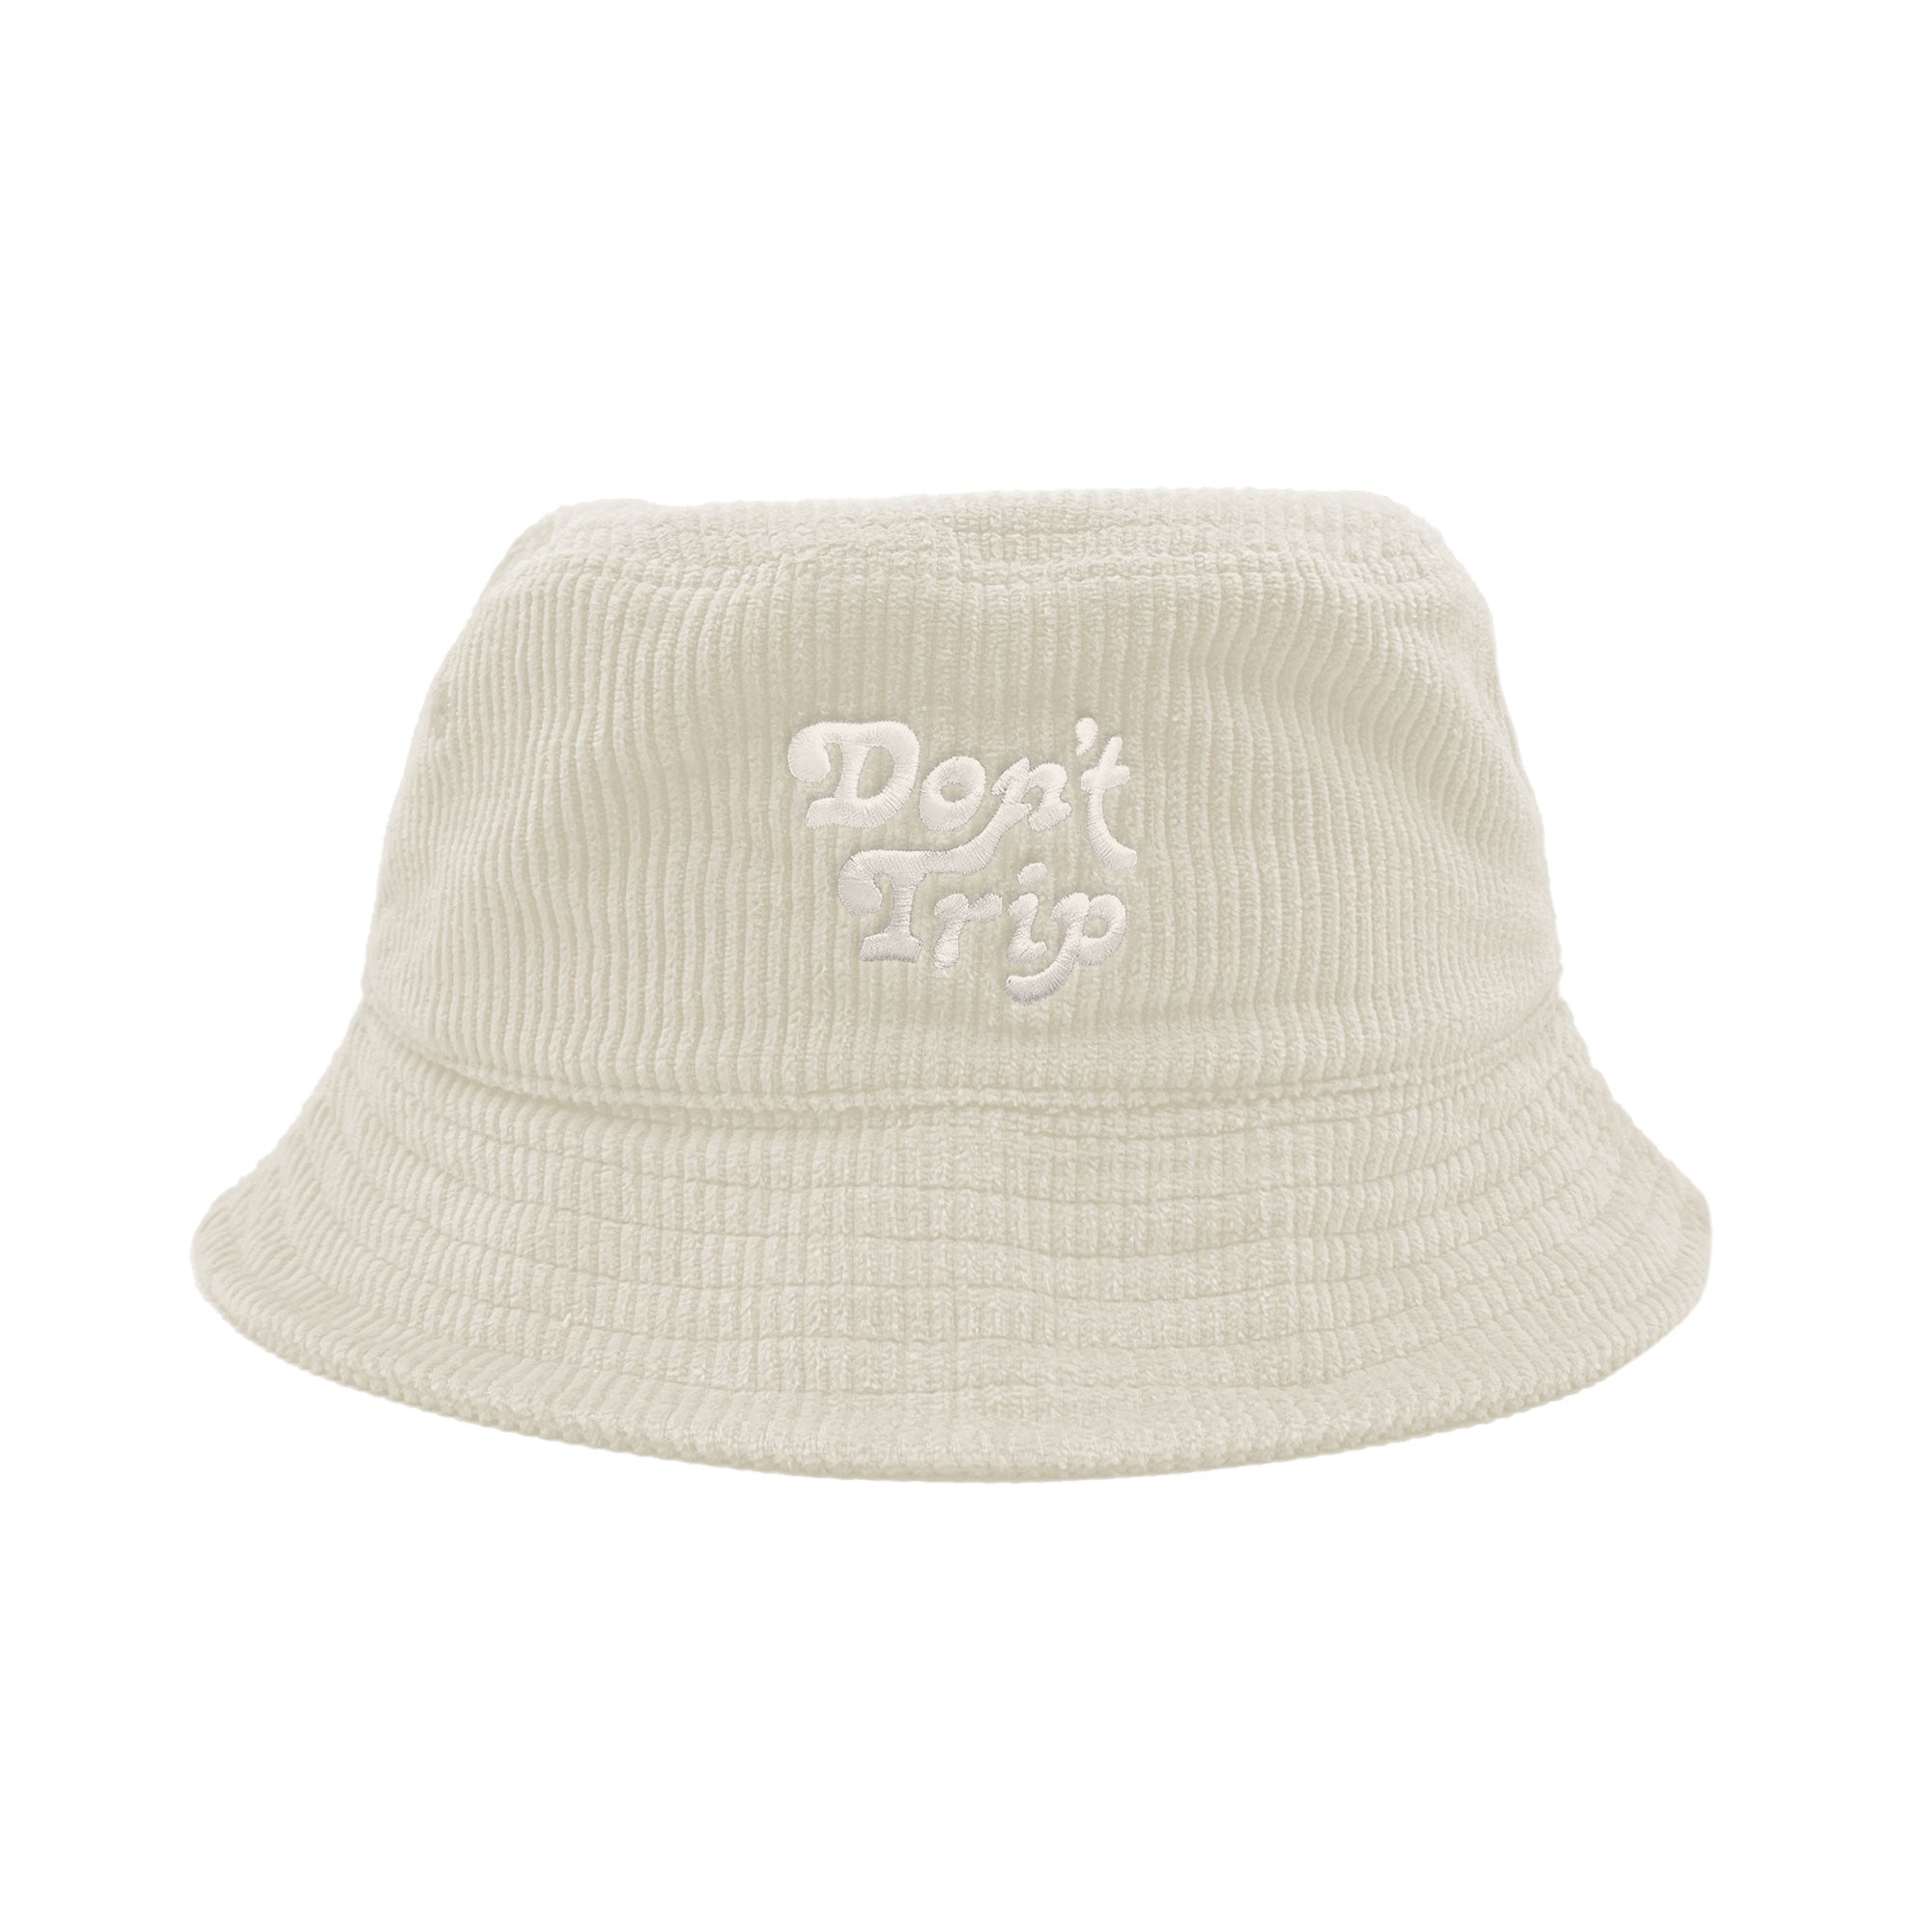 Free & Easy Don't Trip Fat Corduroy Bucket Hat in cream with white Don't Trip embroidery on a white background - Free & Easy